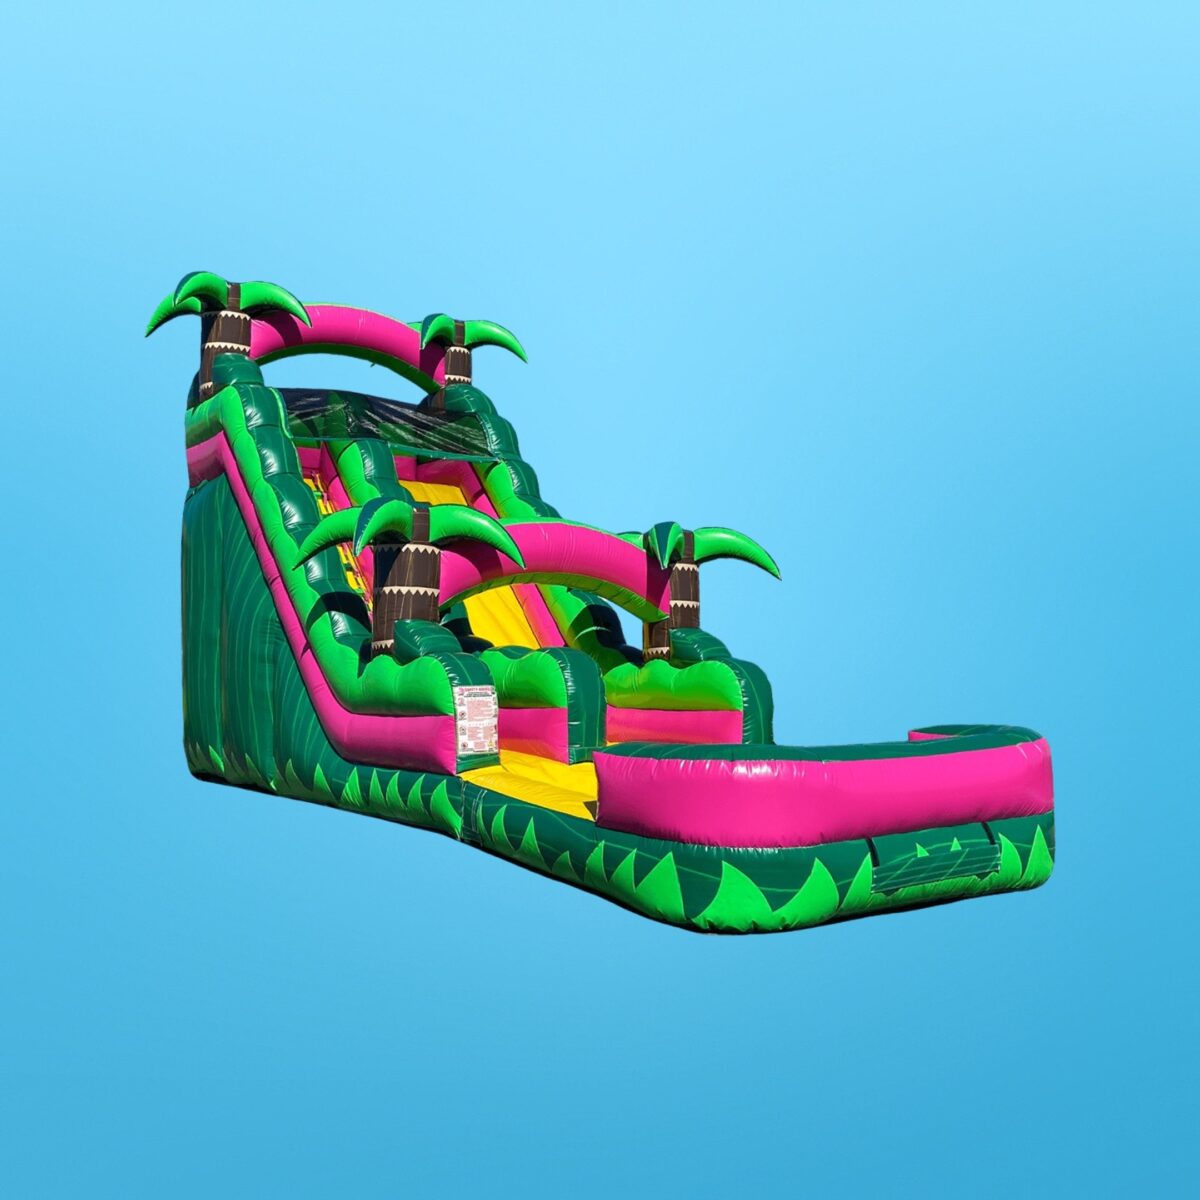 All Waterslides